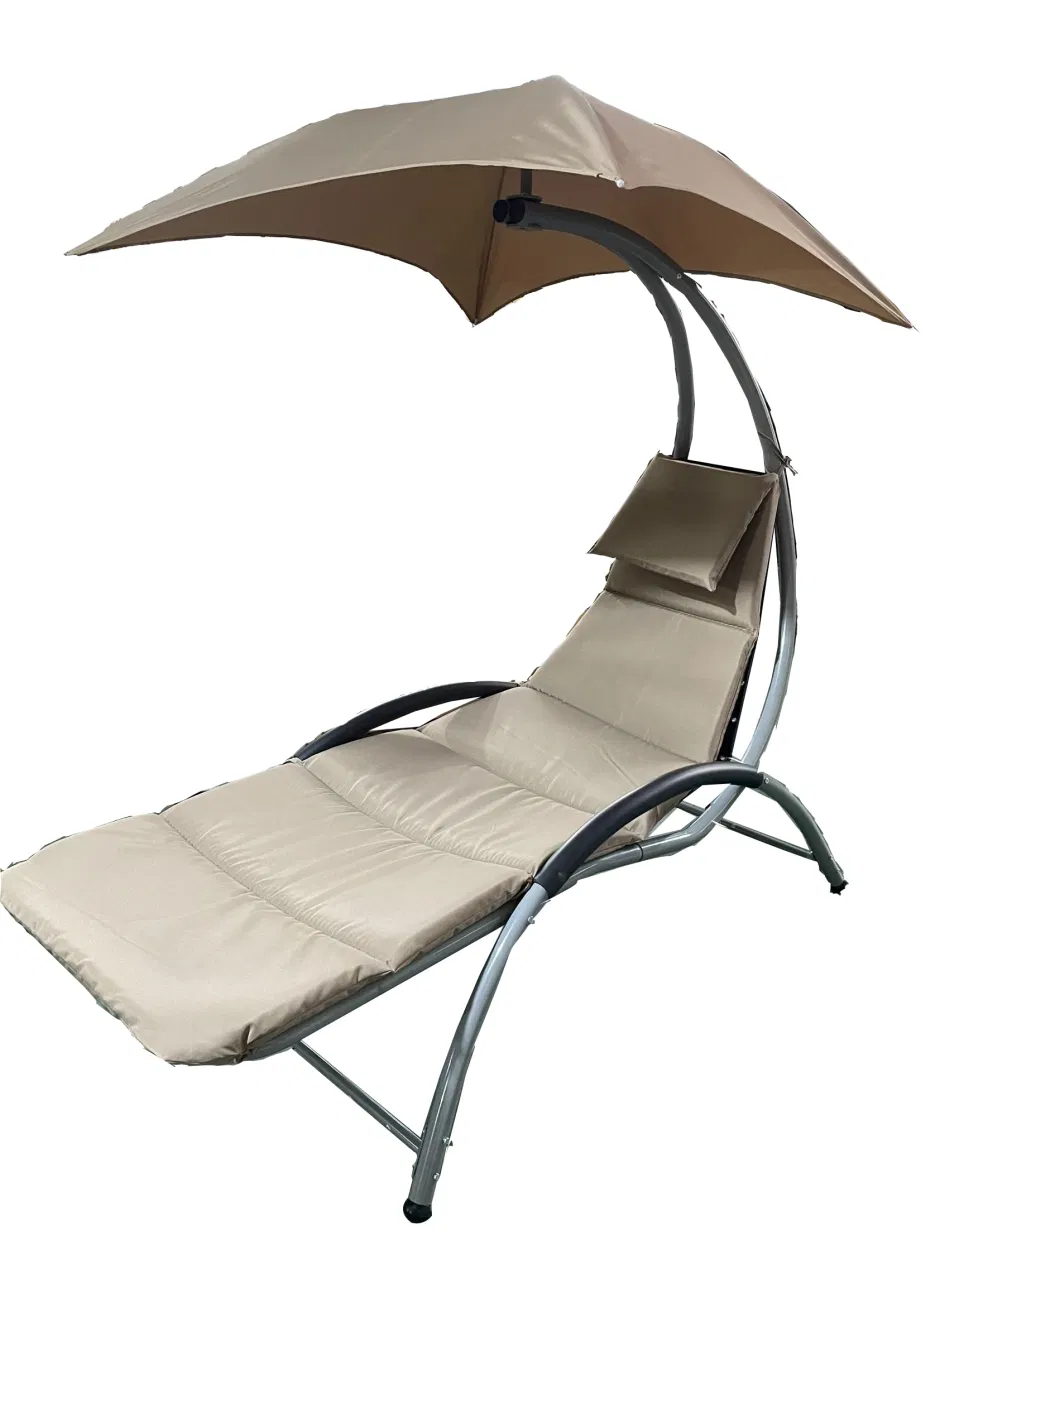 Hanging Pillowed Chaise Lounge-Double Arc Hanging Swing Chair Hammock